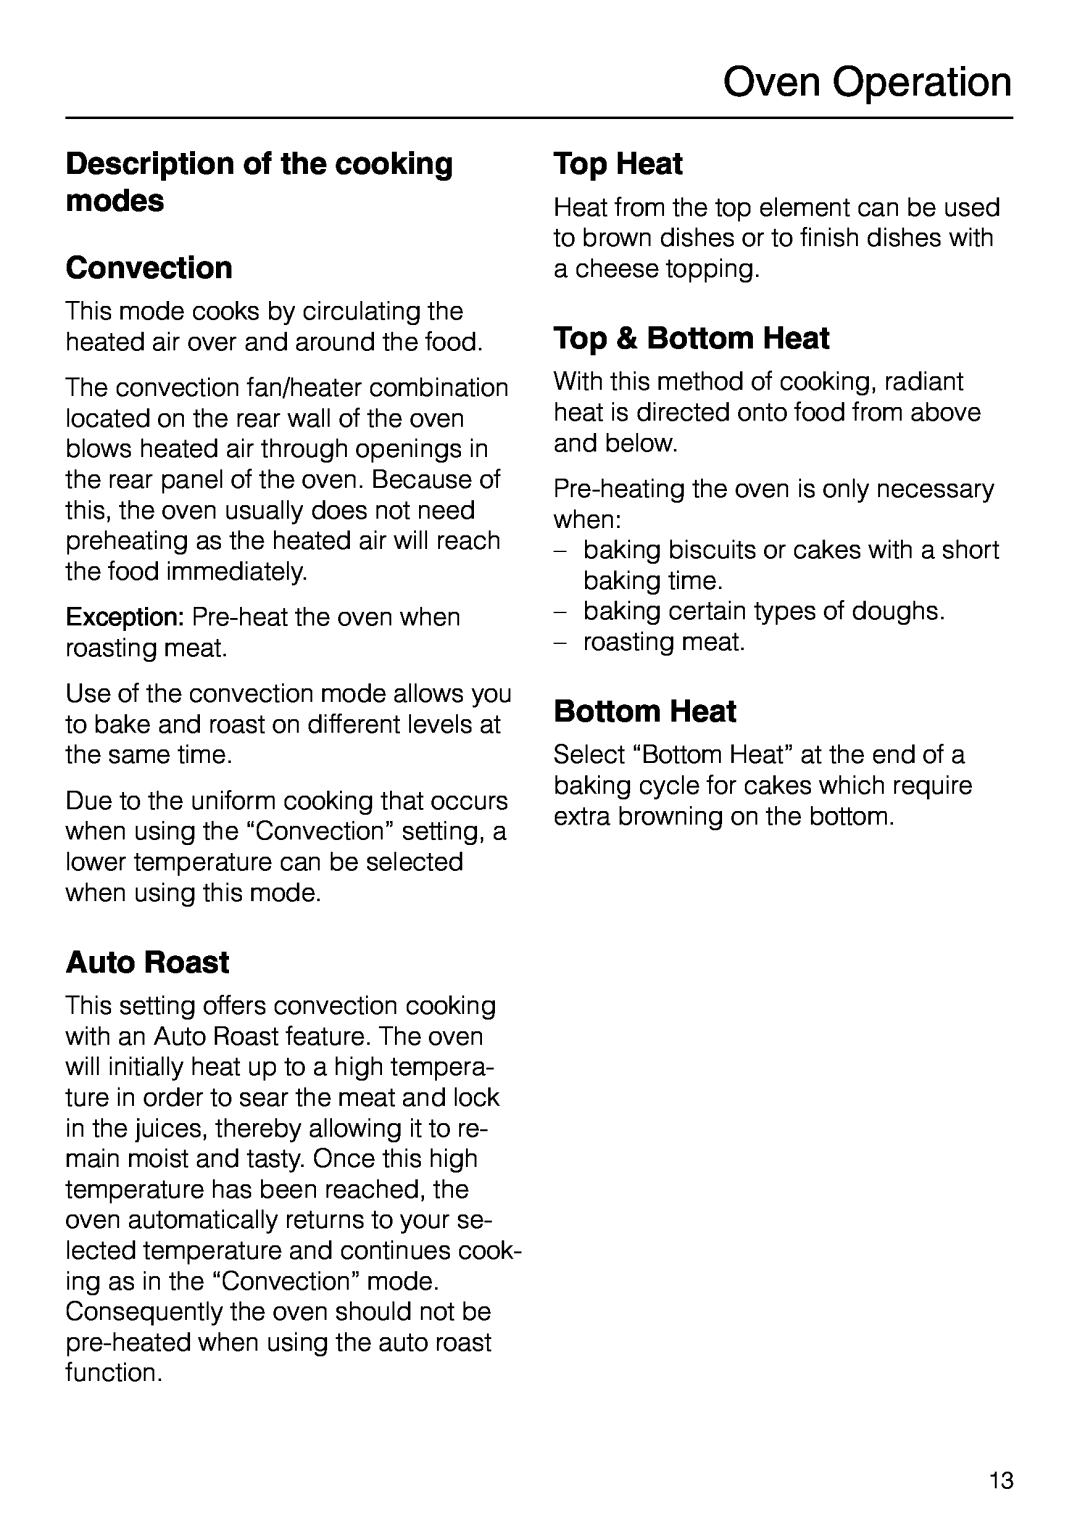 Miele H 277 B manual Oven Operation, Description of the cooking modes Convection, Auto Roast, Top Heat, Top & Bottom Heat 